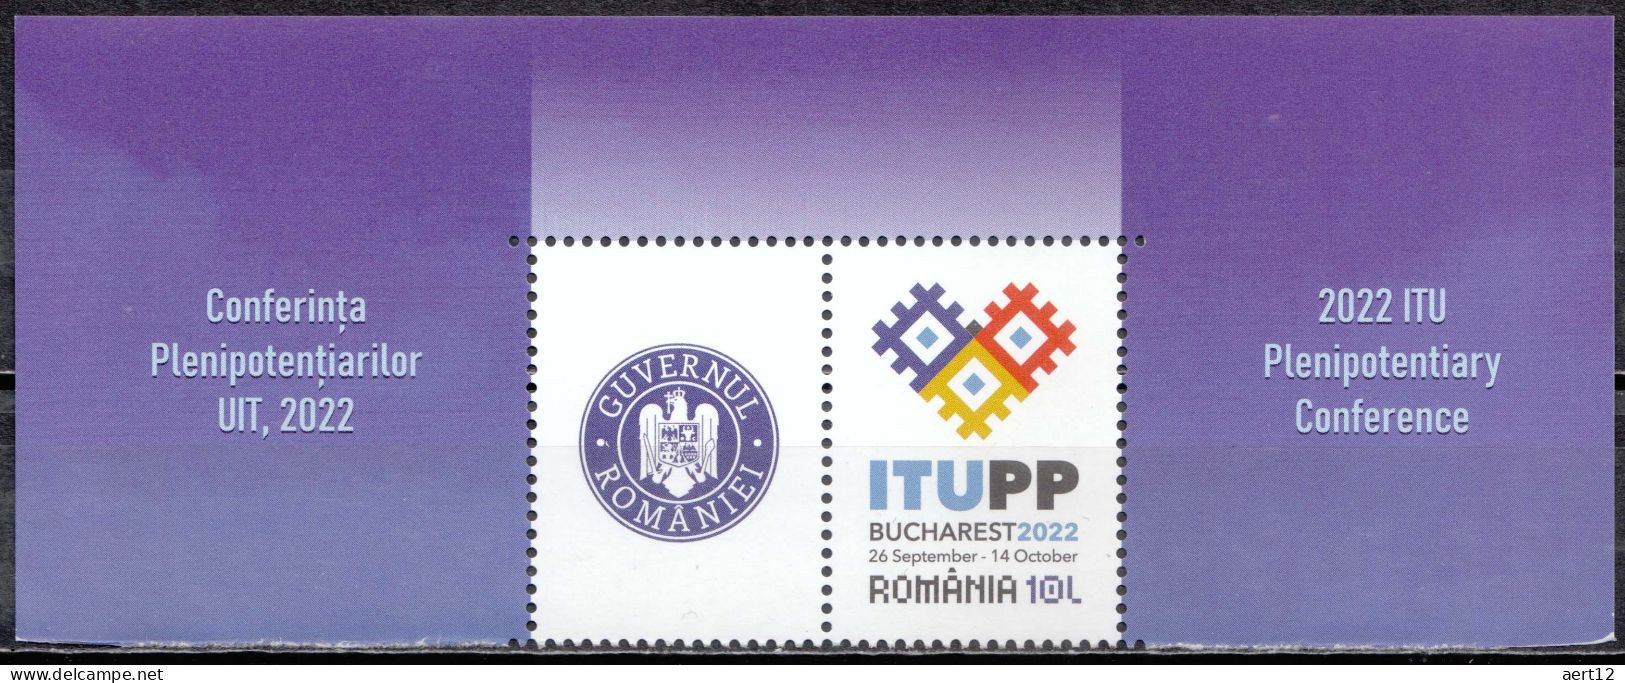 2022, Romania, ITU Plenipotentiary Conference, Bucharest, Conferences, U.I.T., 1 Stamps+Label M1, MNH(**), LPMP 2388 - Unused Stamps